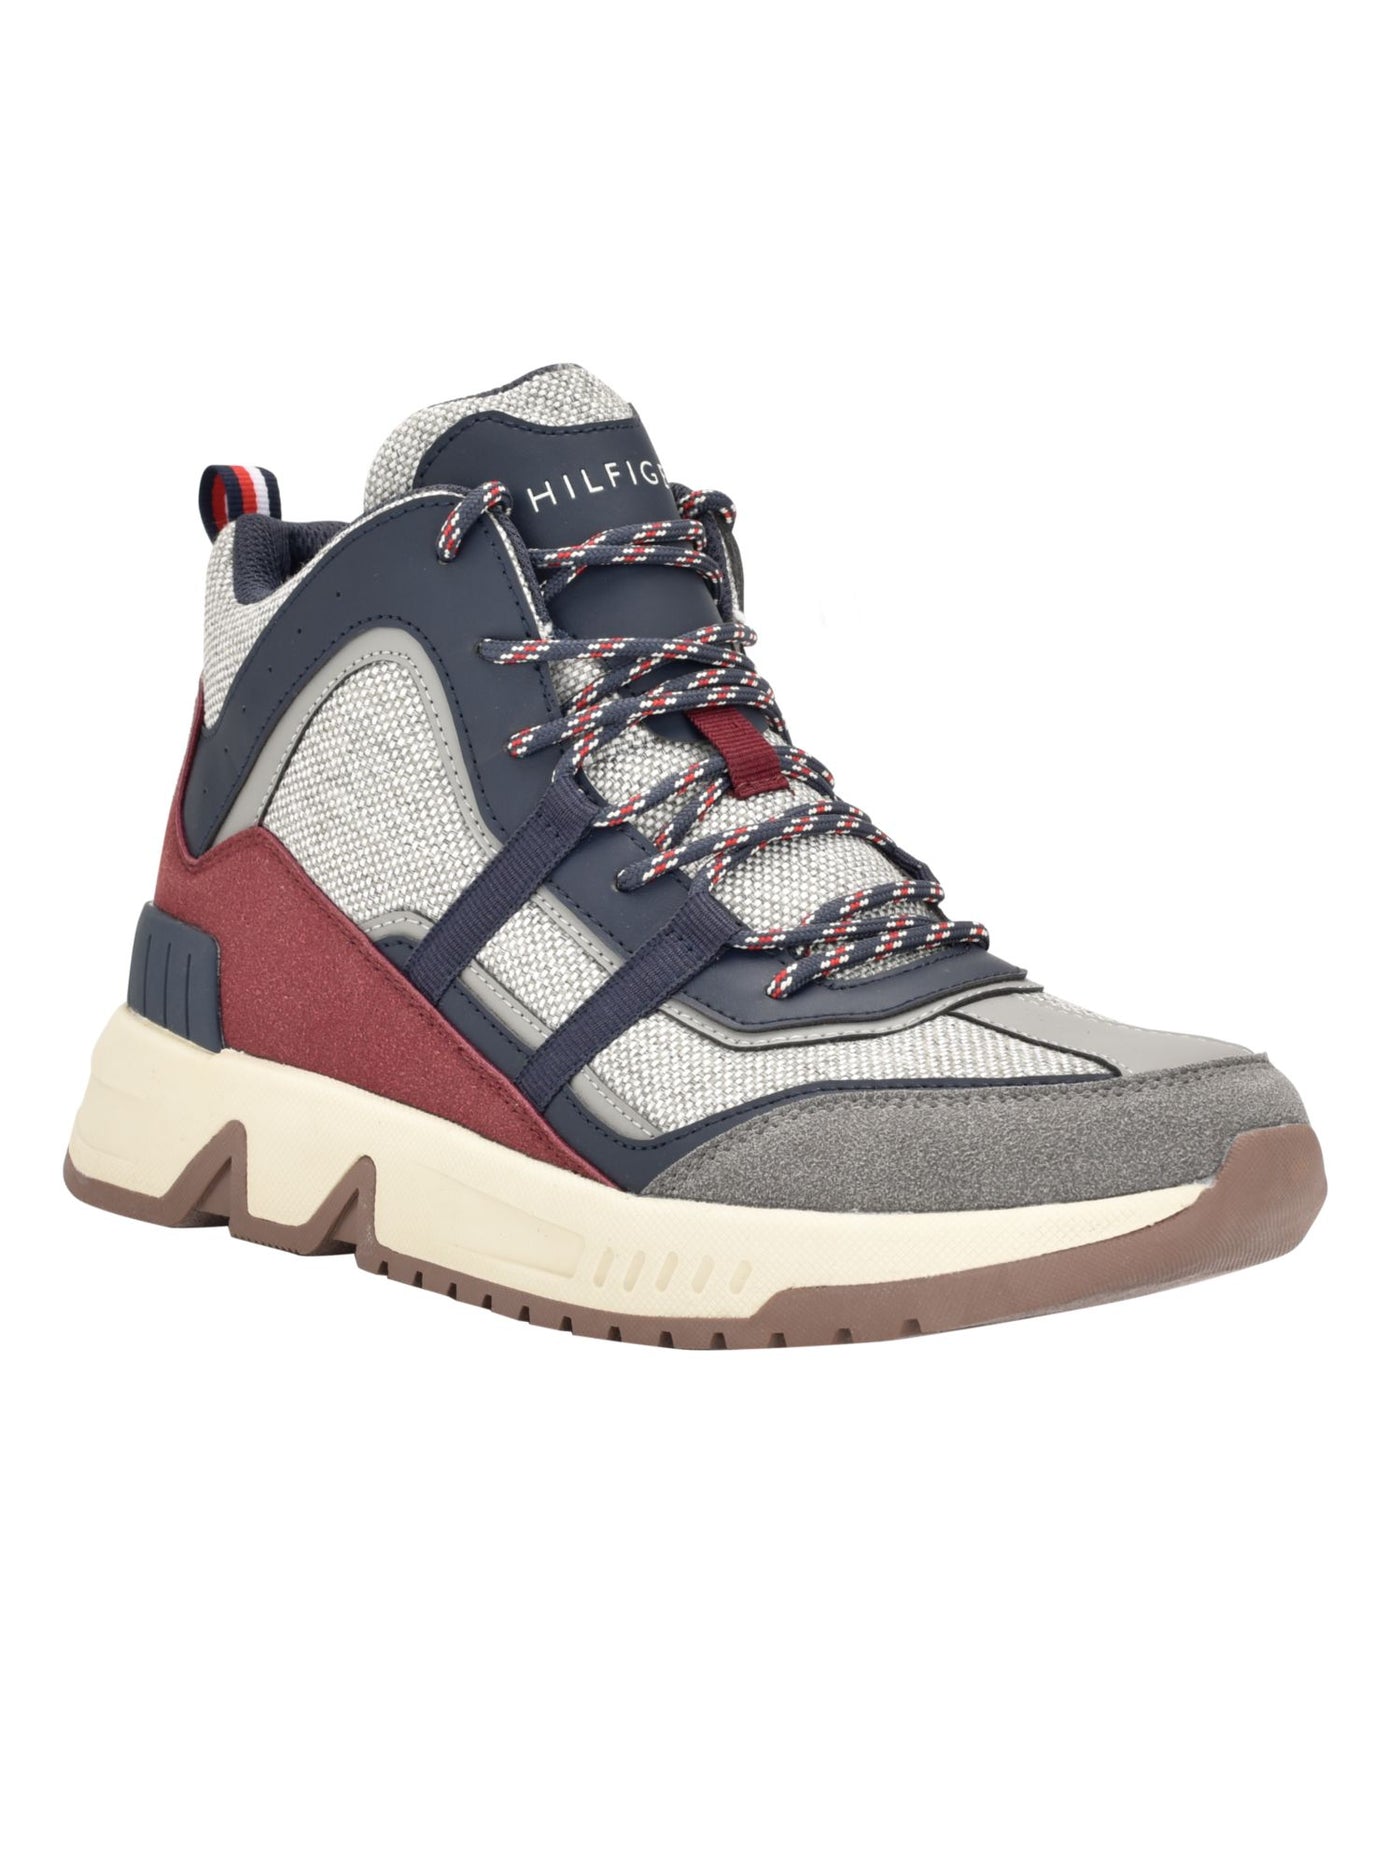 TOMMY HILFIGER Mens Gray Colorblock Cushioned Letto Round Toe Lace-Up Hiking Boots 9 M